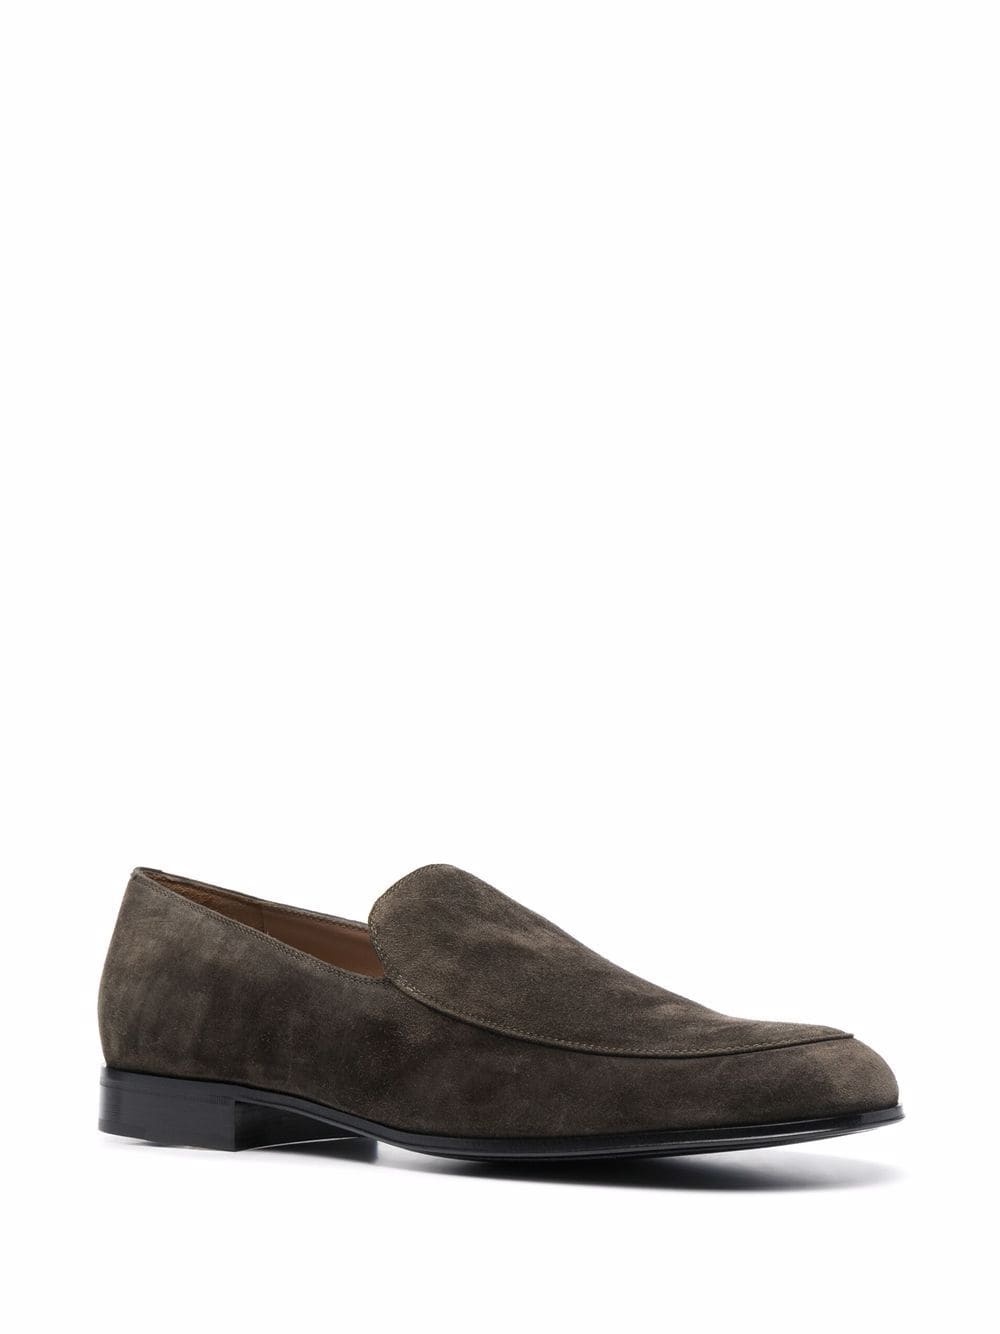 suede-leather loafers - 2